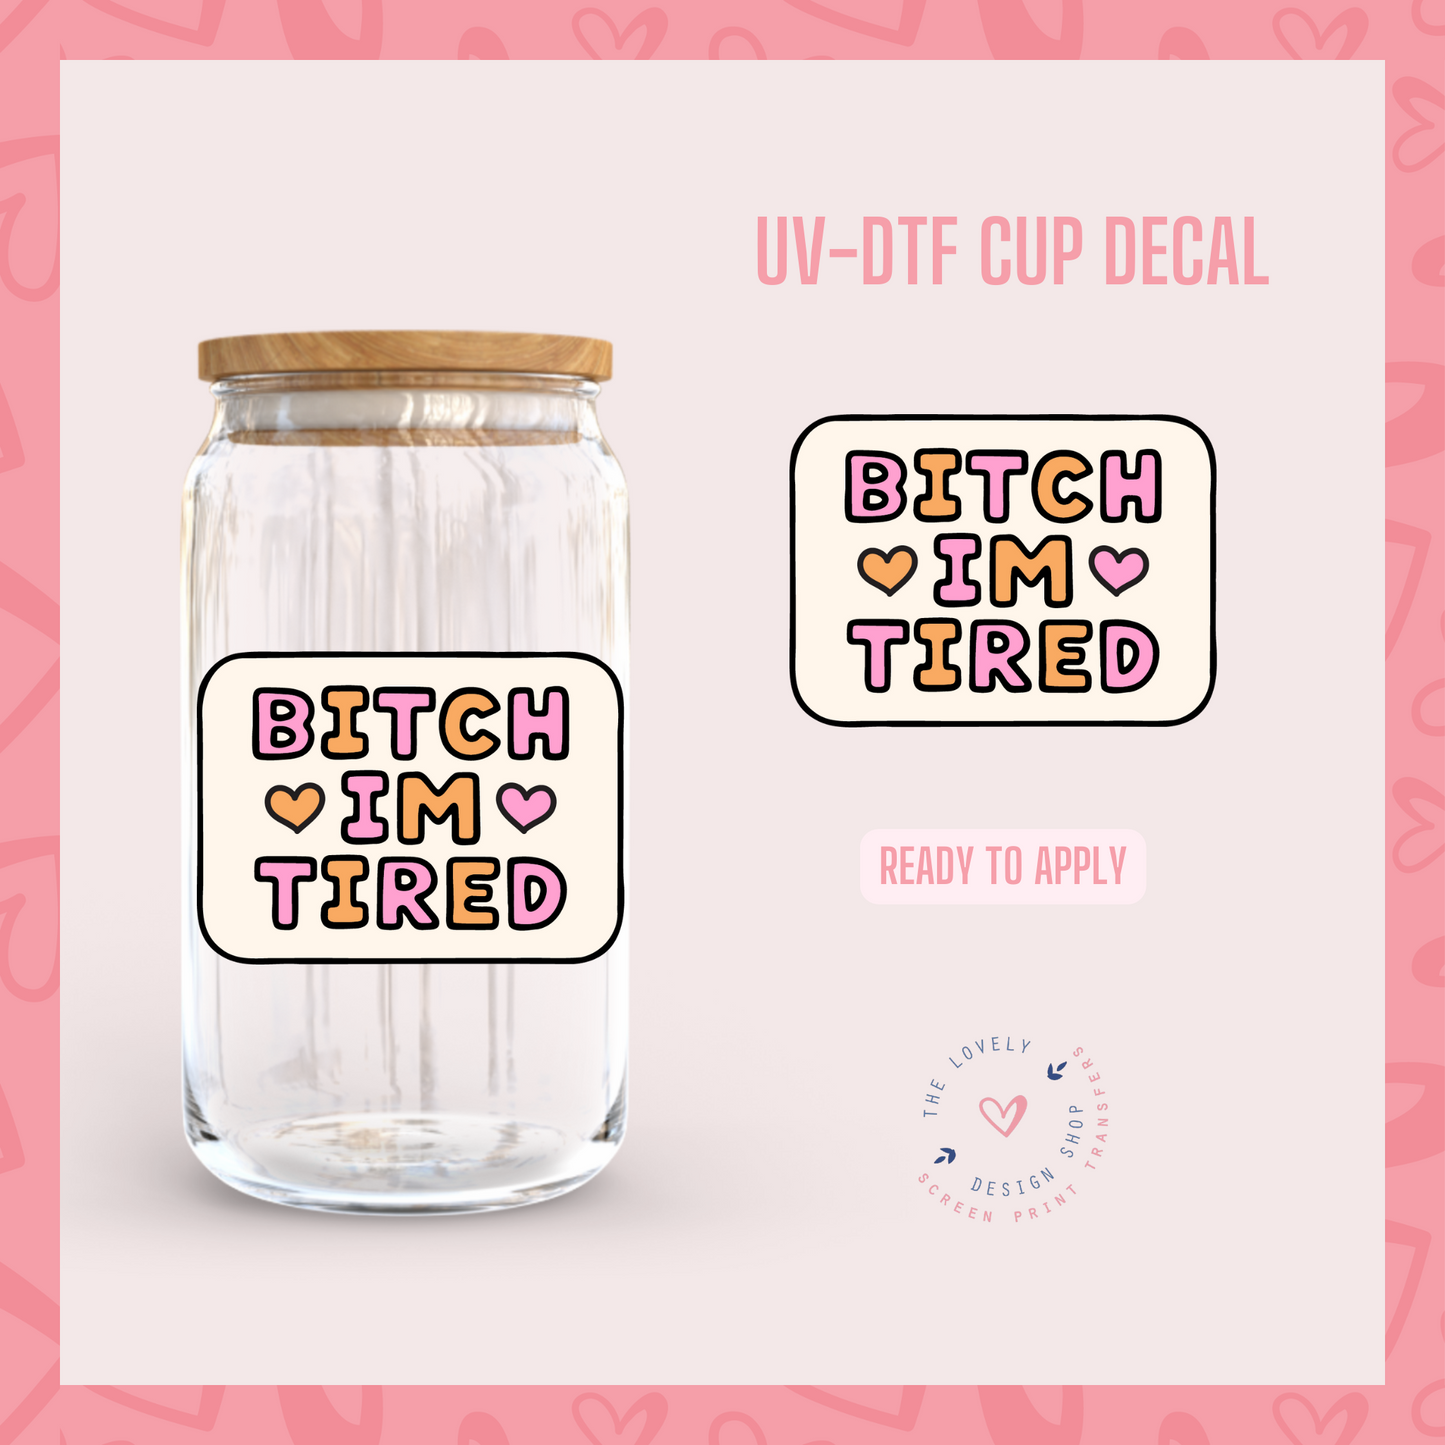 Bitch I'm Tired - UV DTF Cup Decal (Ready to Ship) Apr 17